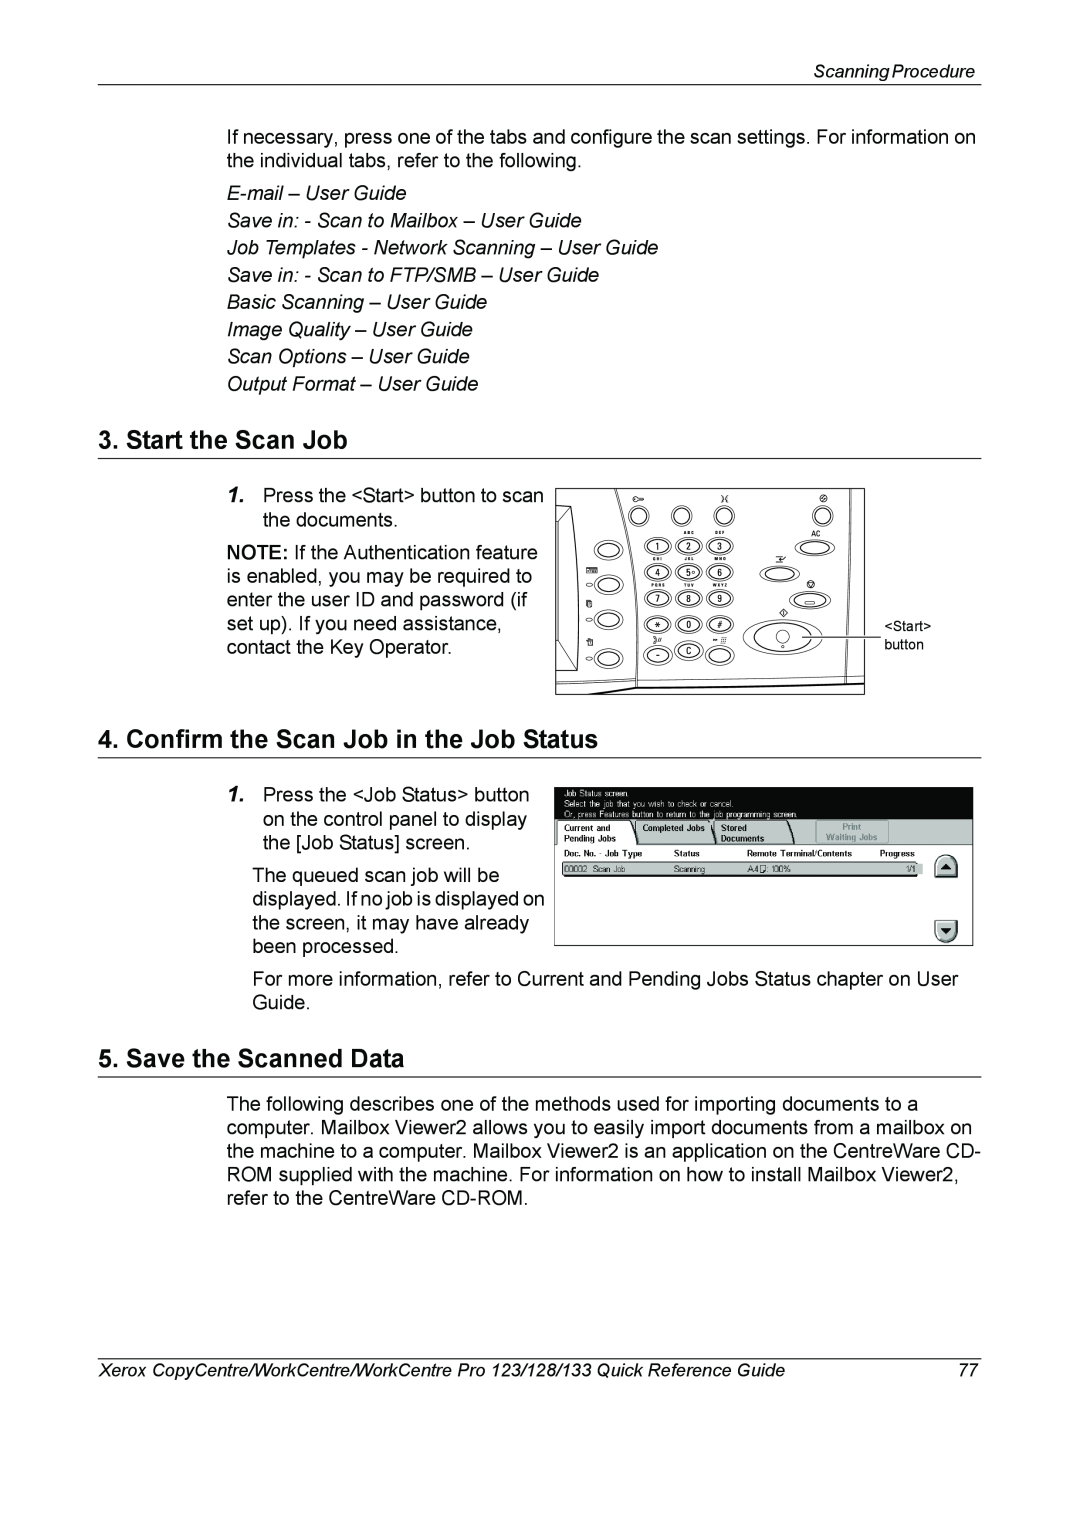 Xerox 604P18037 manual Start the Scan Job, Confirm the Scan Job in the Job Status, Save the Scanned Data 